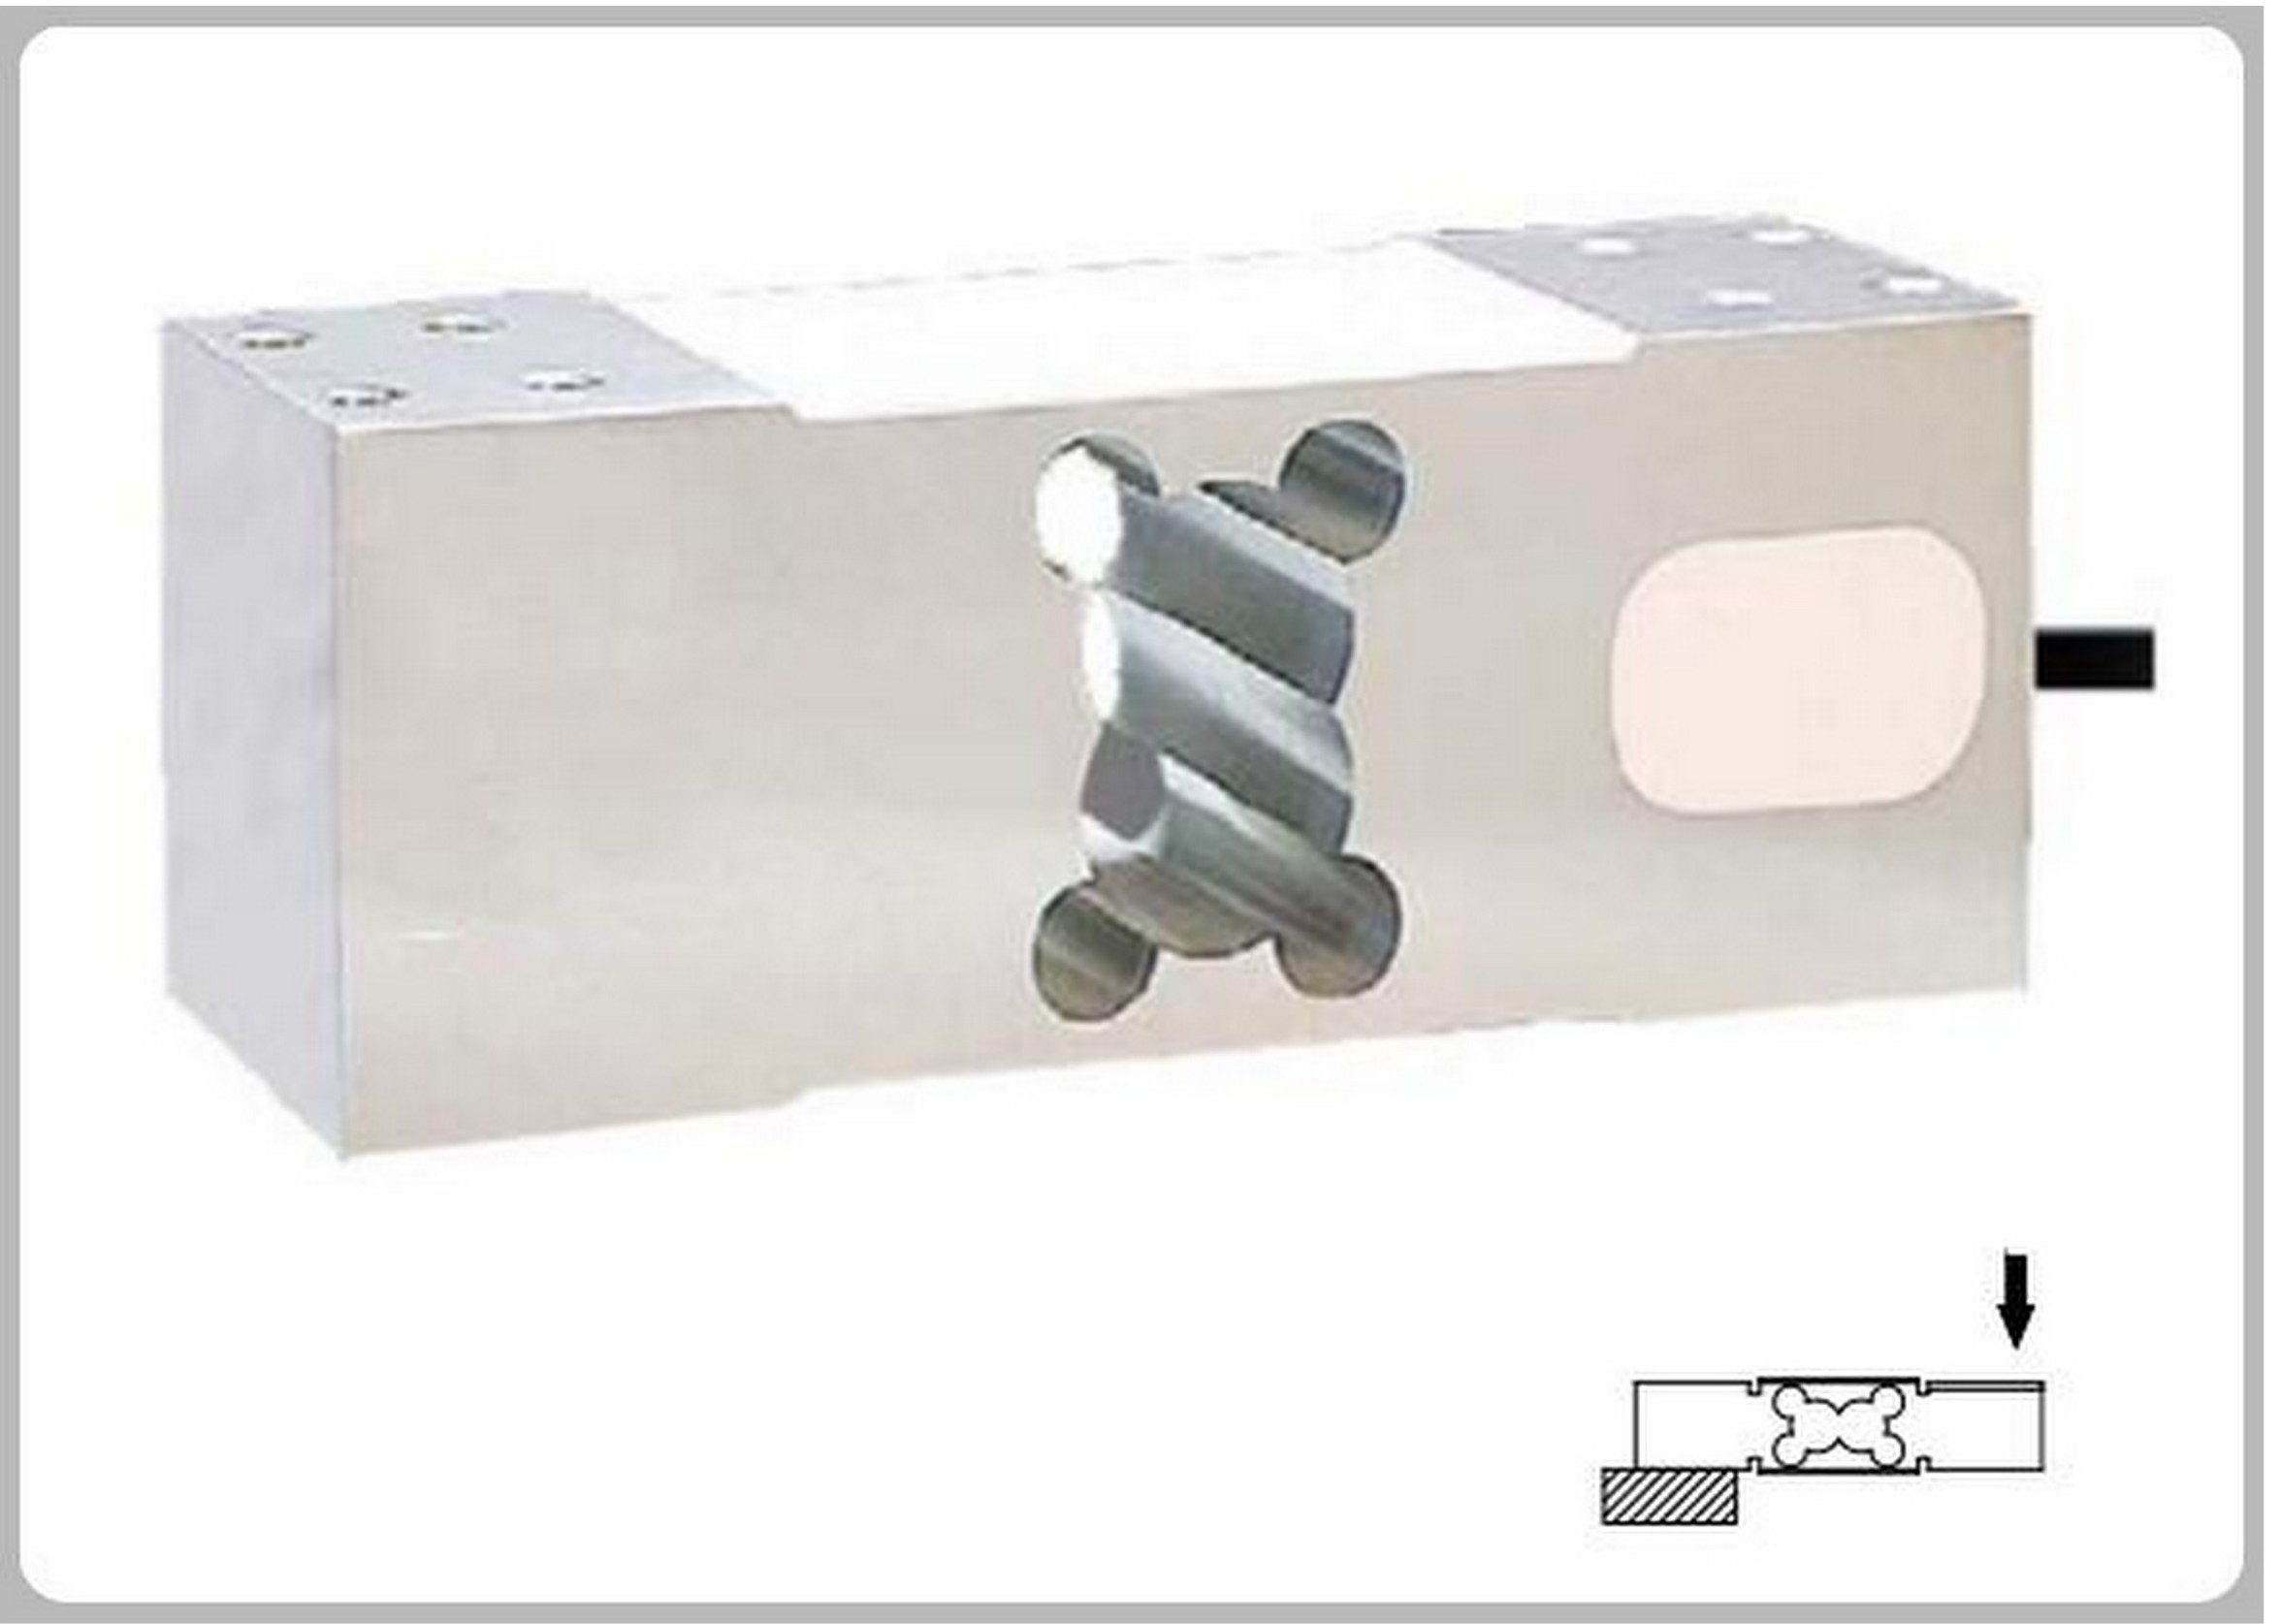 MC8025 LOAD CELL